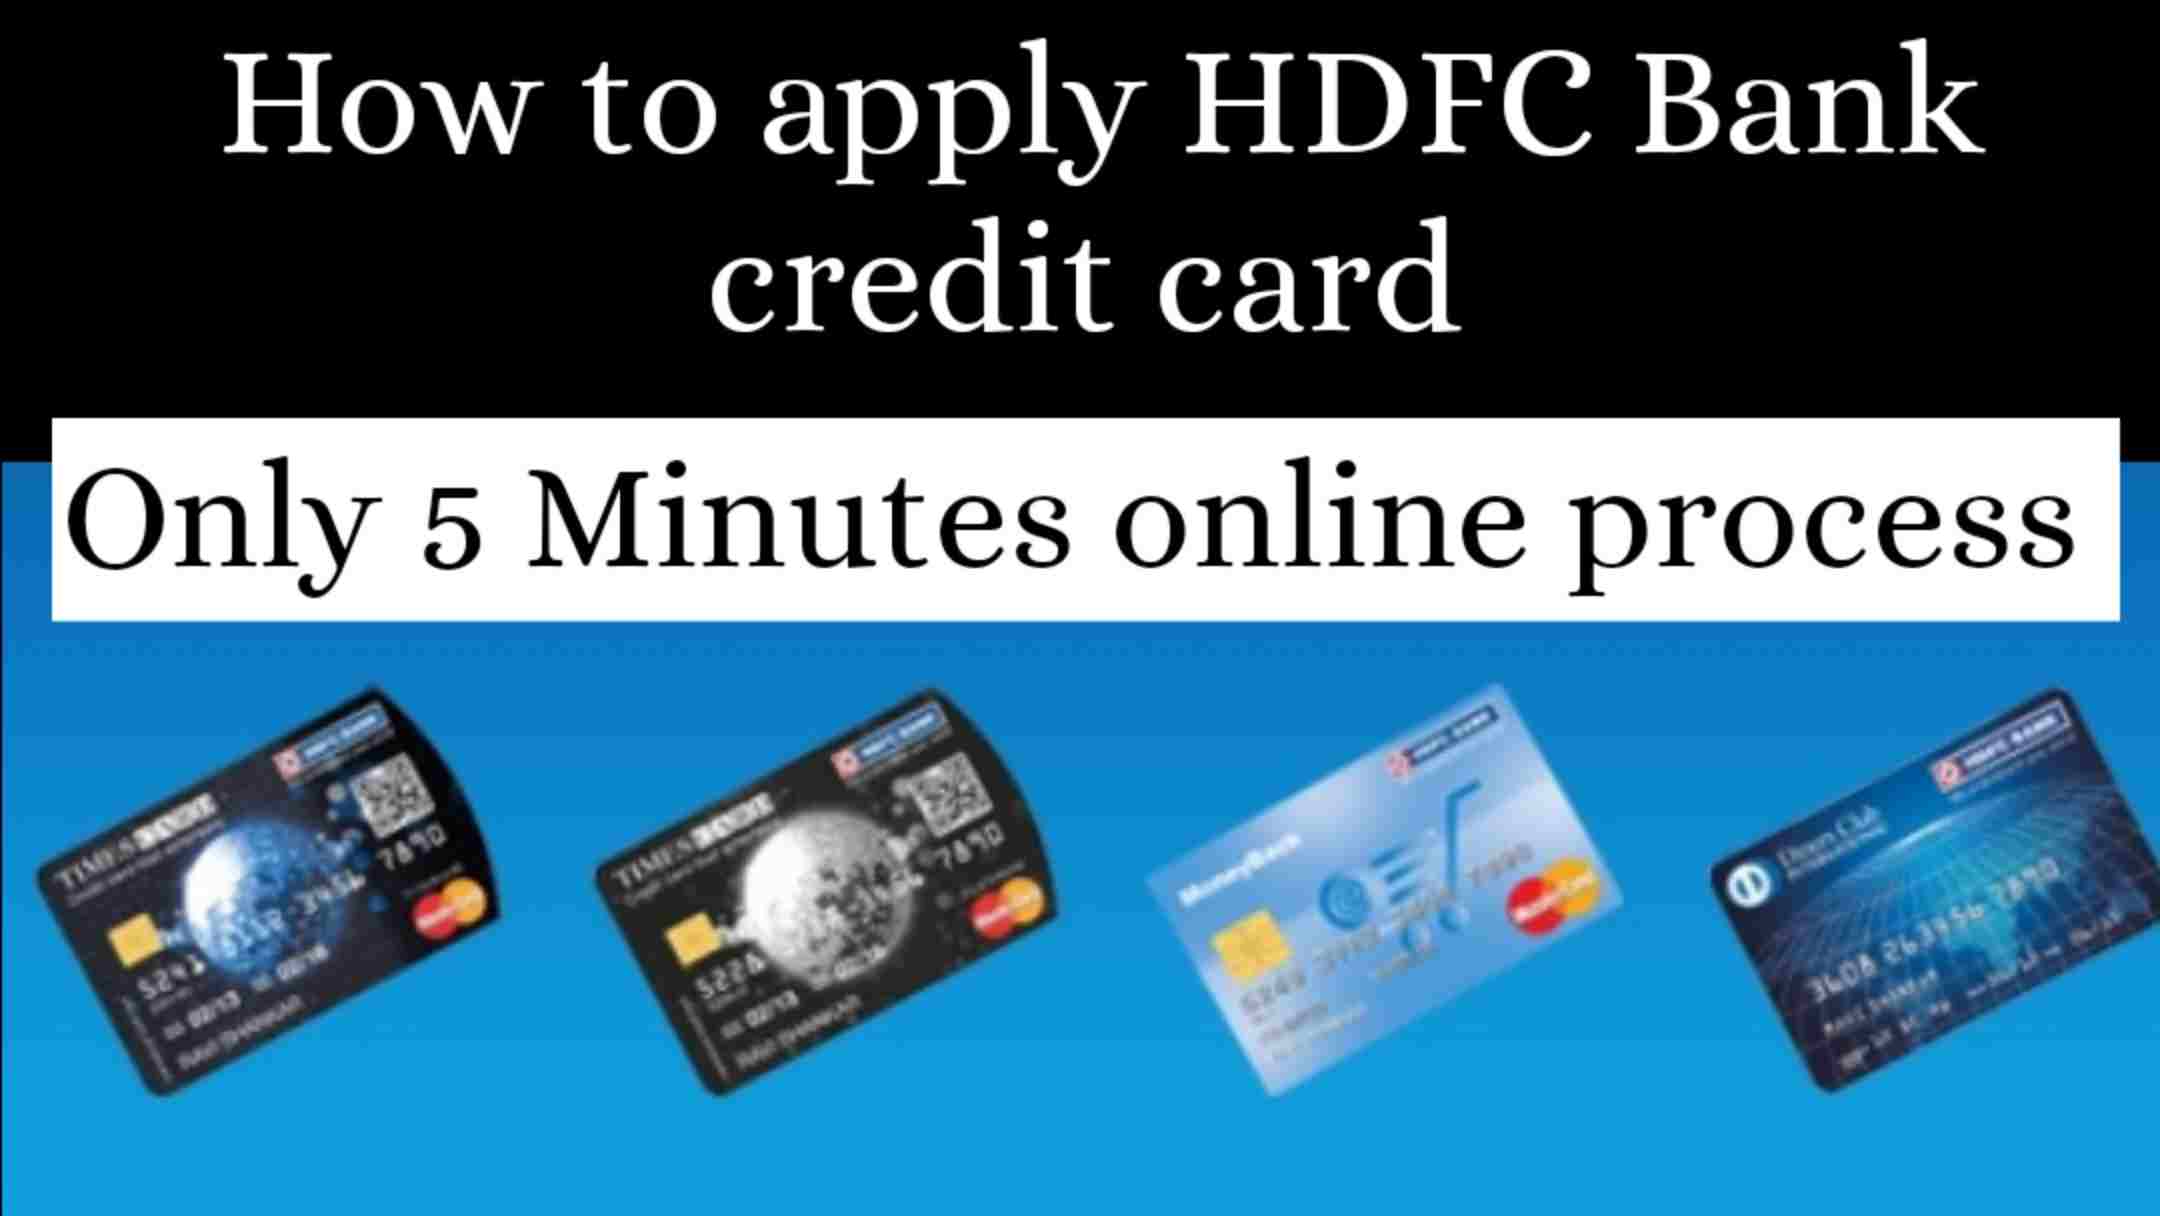 How to apply HDFC Regalia credit card & Hdfc top 10 credit card/